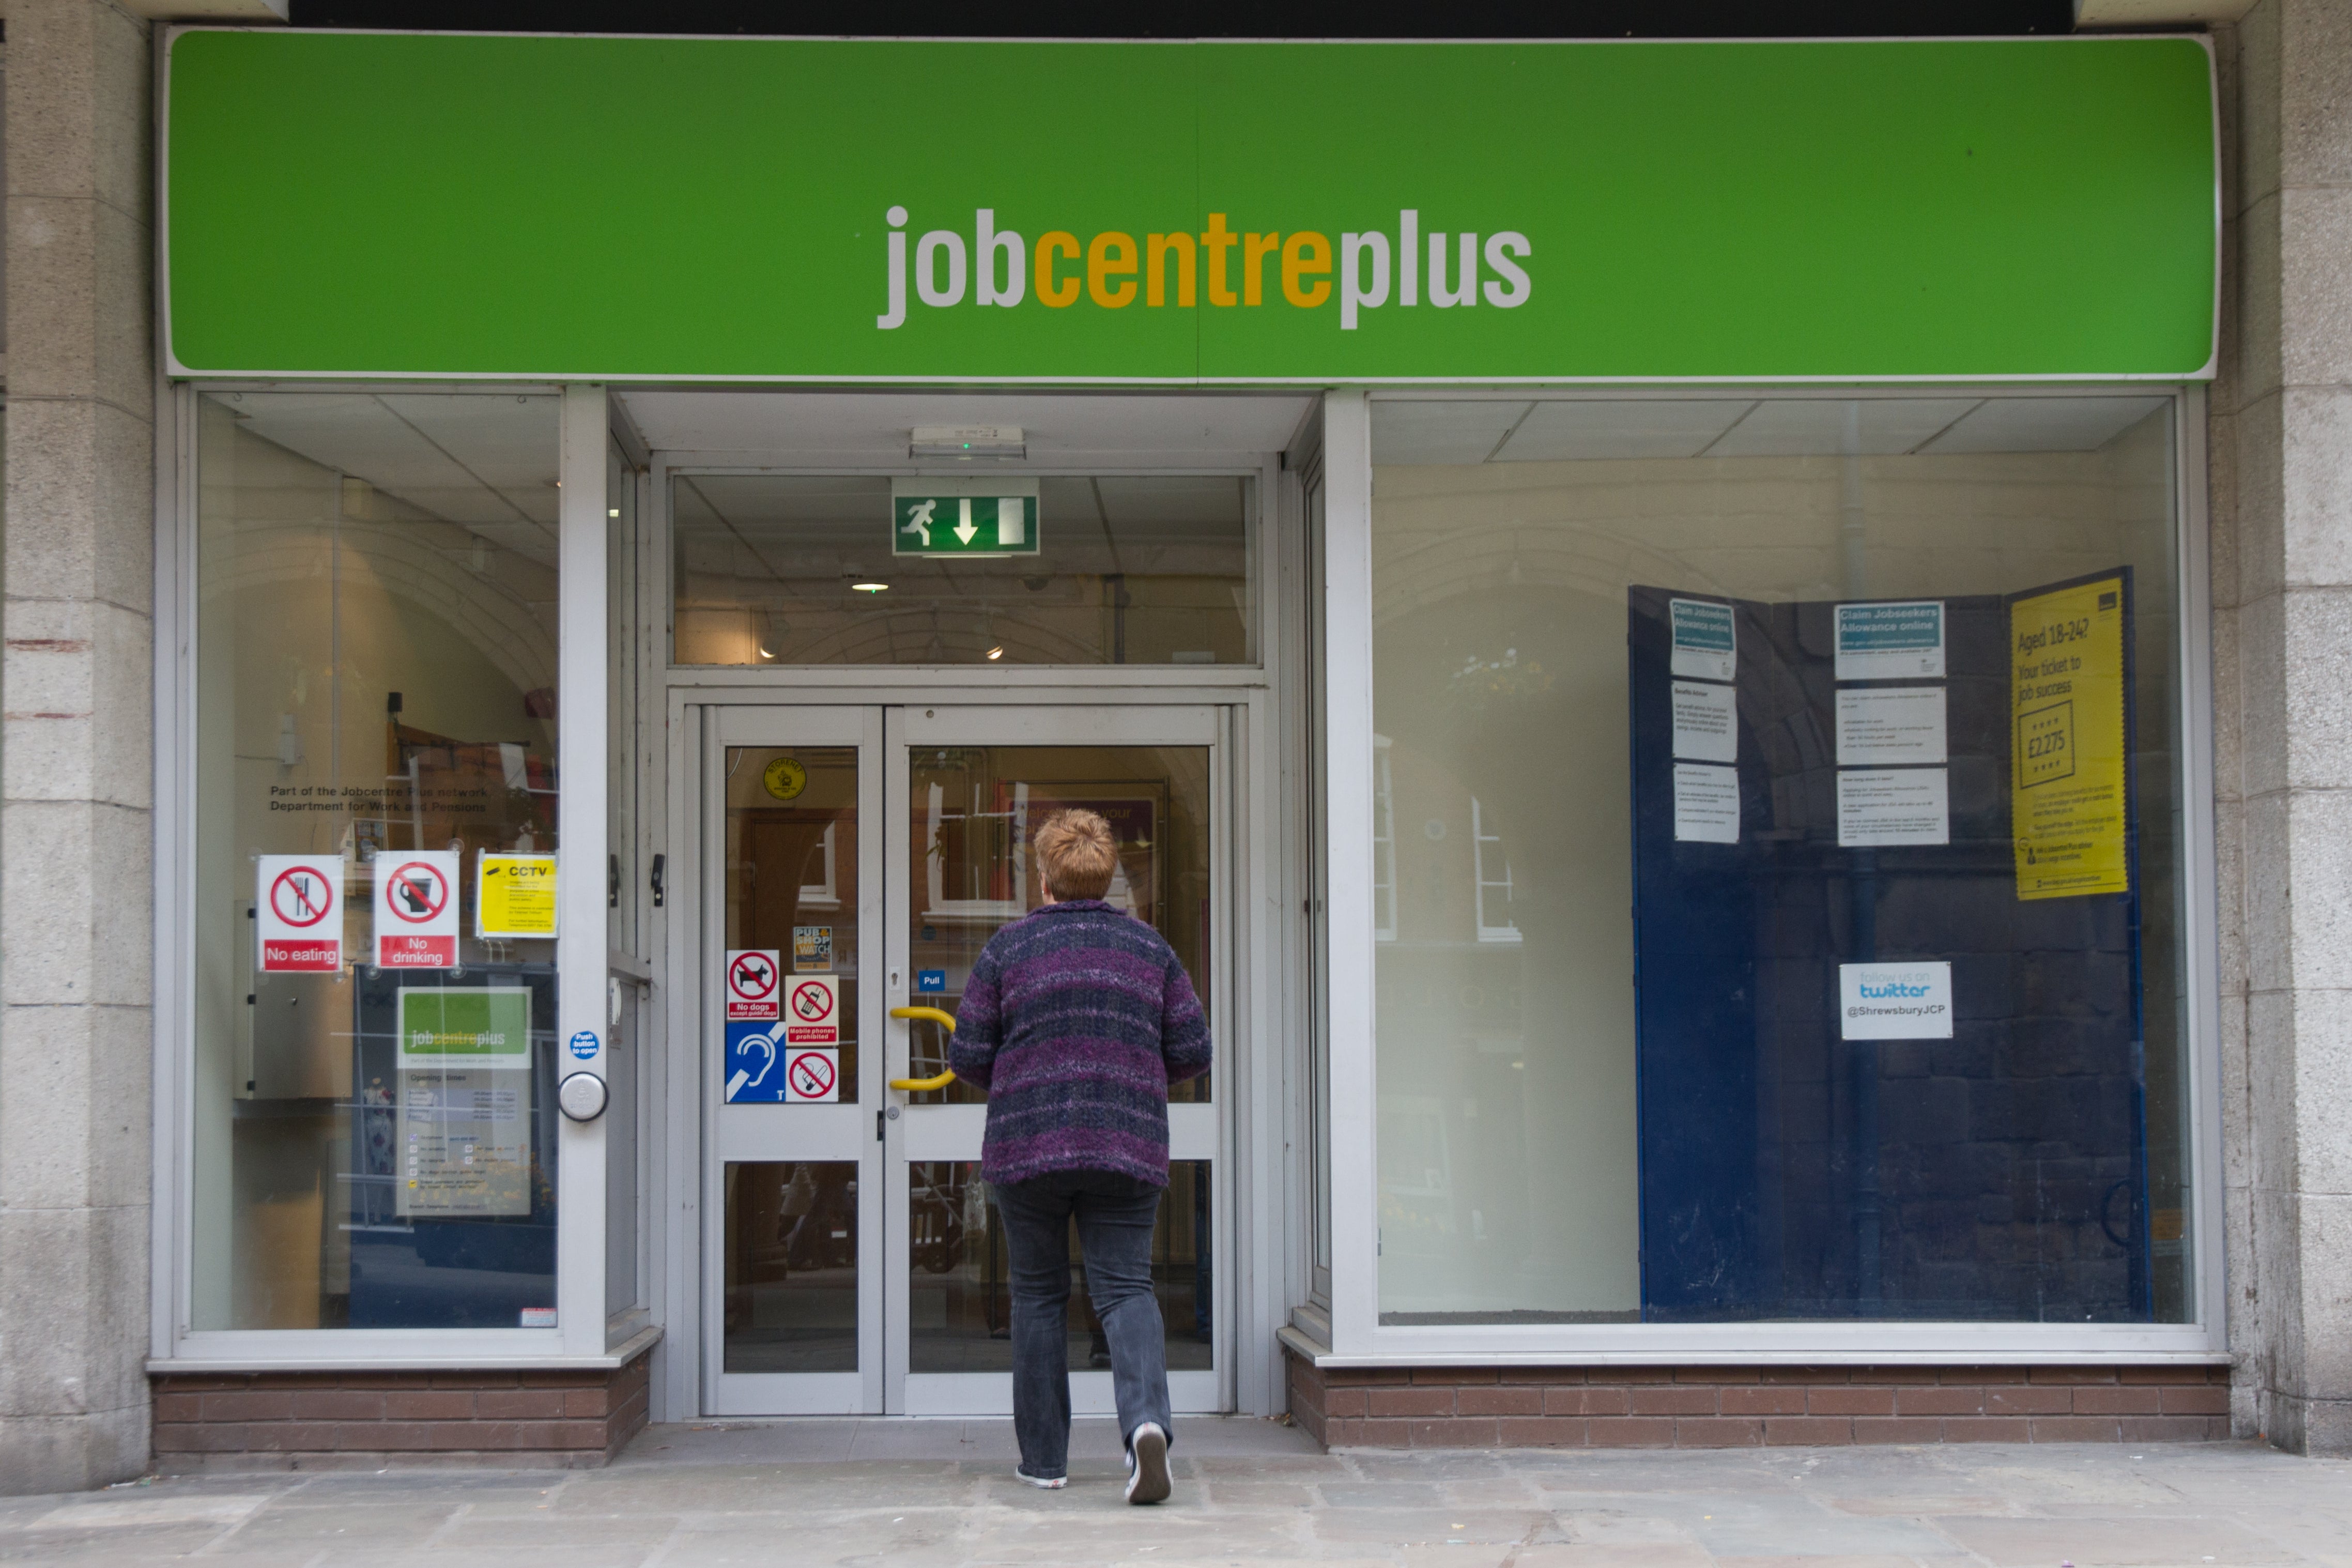 More people who have never experienced benefits are now in the social welfare system